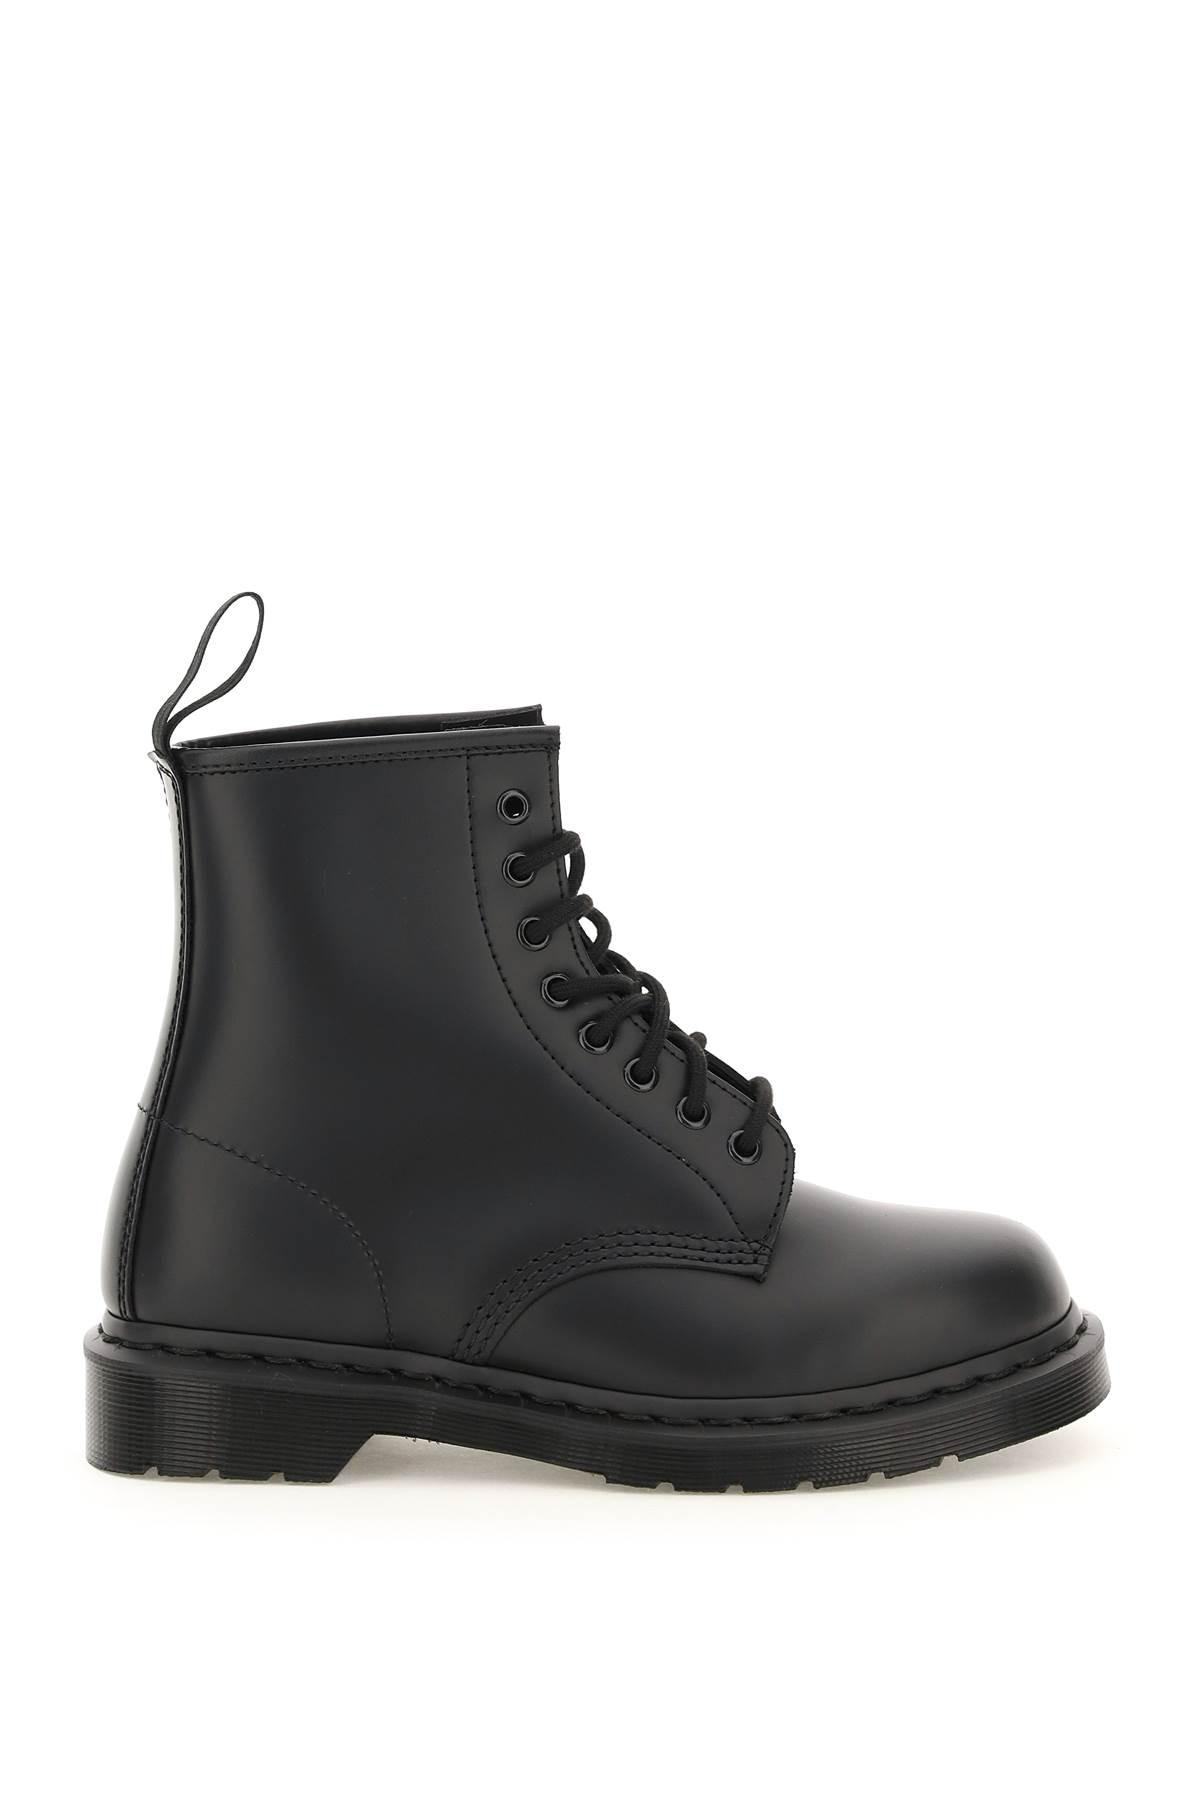 Dr. Martens Leather Dr.martens 1460 Mono Smooth Lace-up Combat Boots in  Black for Men - Save 16% | Lyst